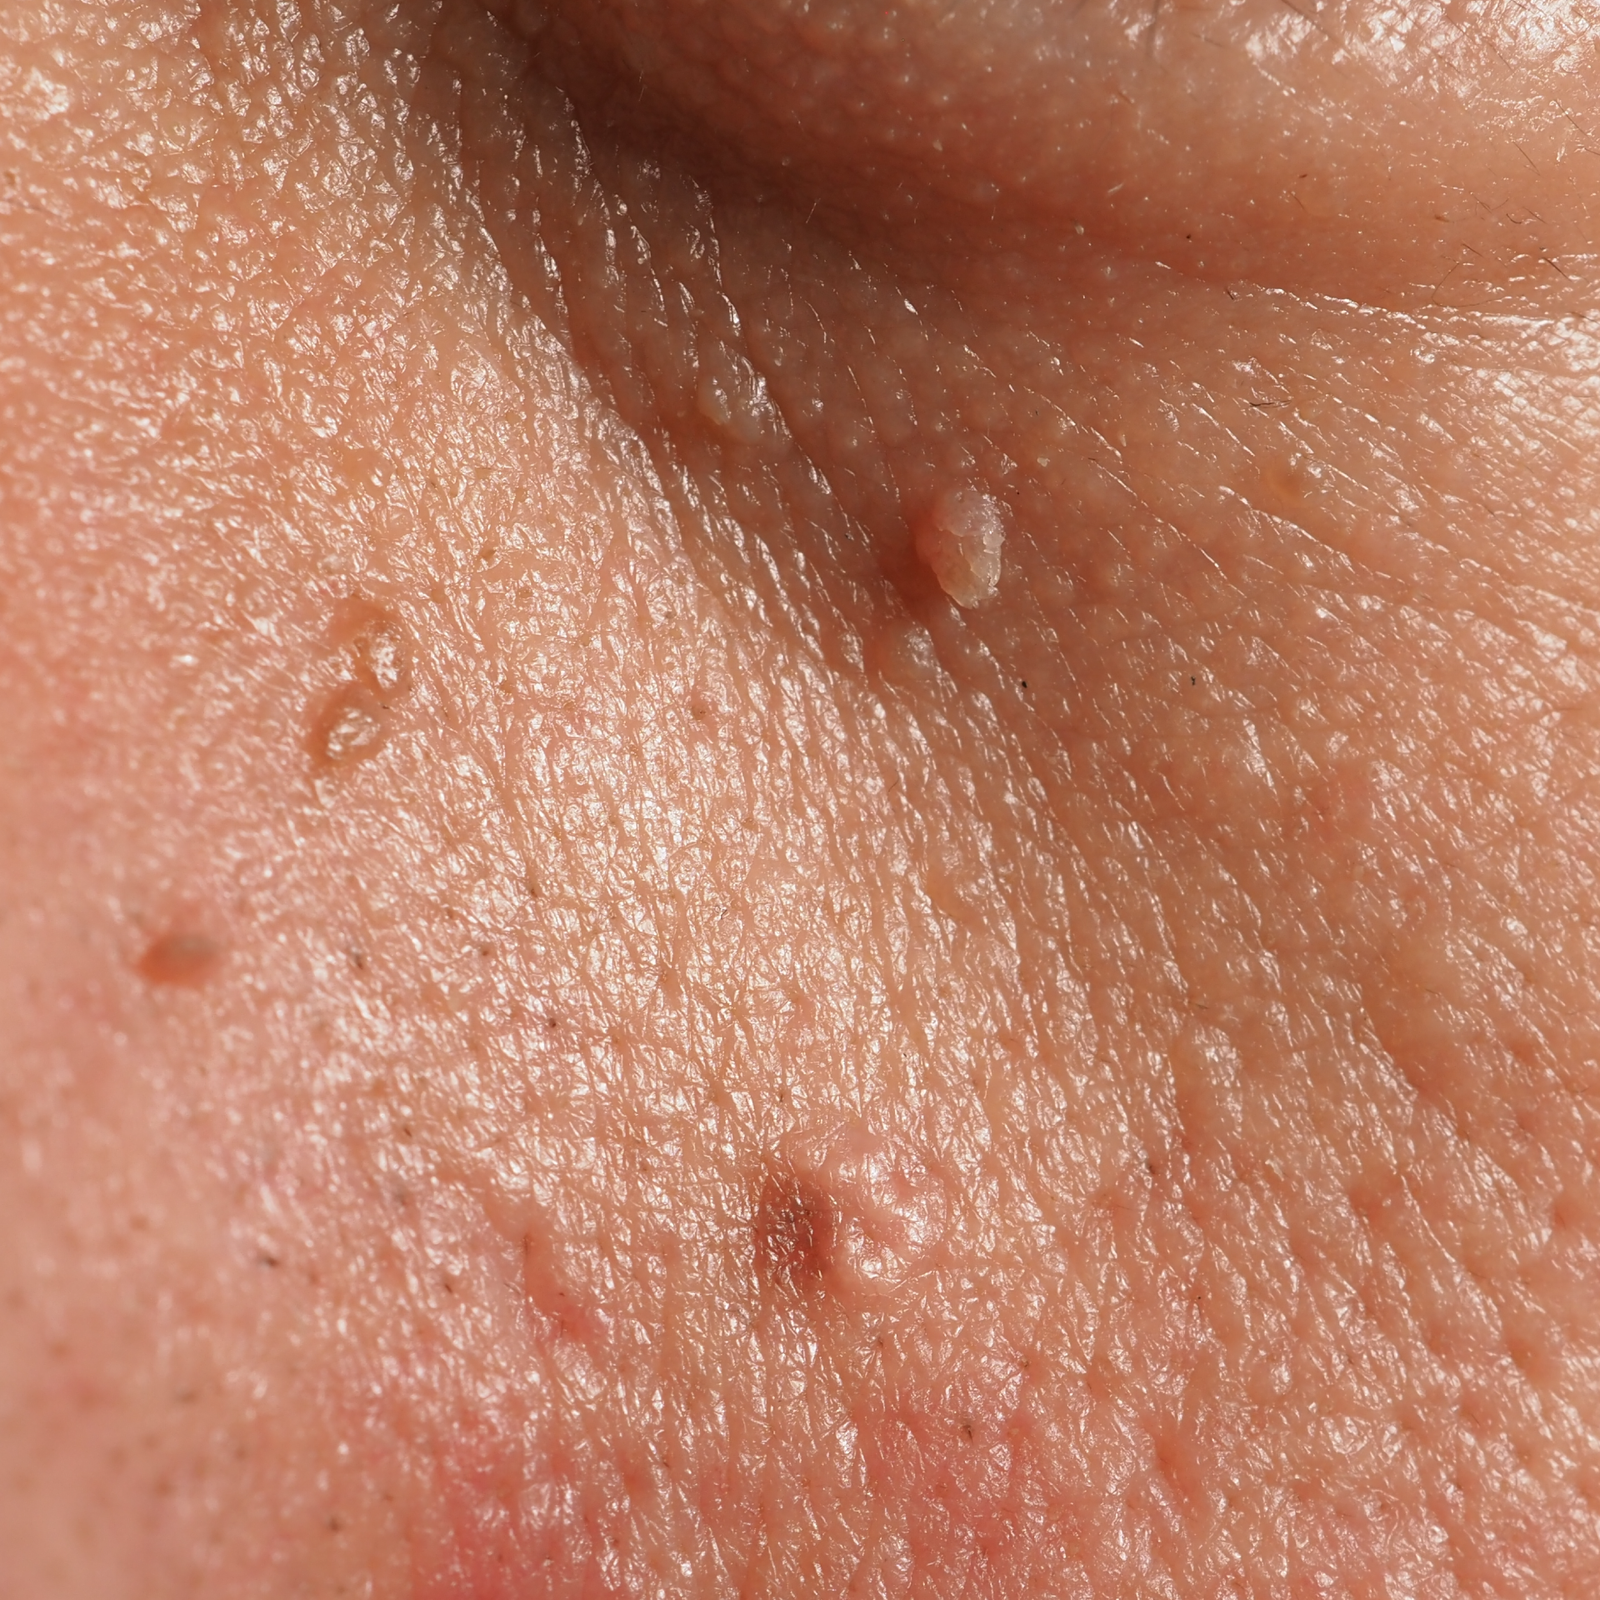 SKIN ANOMALY REMOVAL